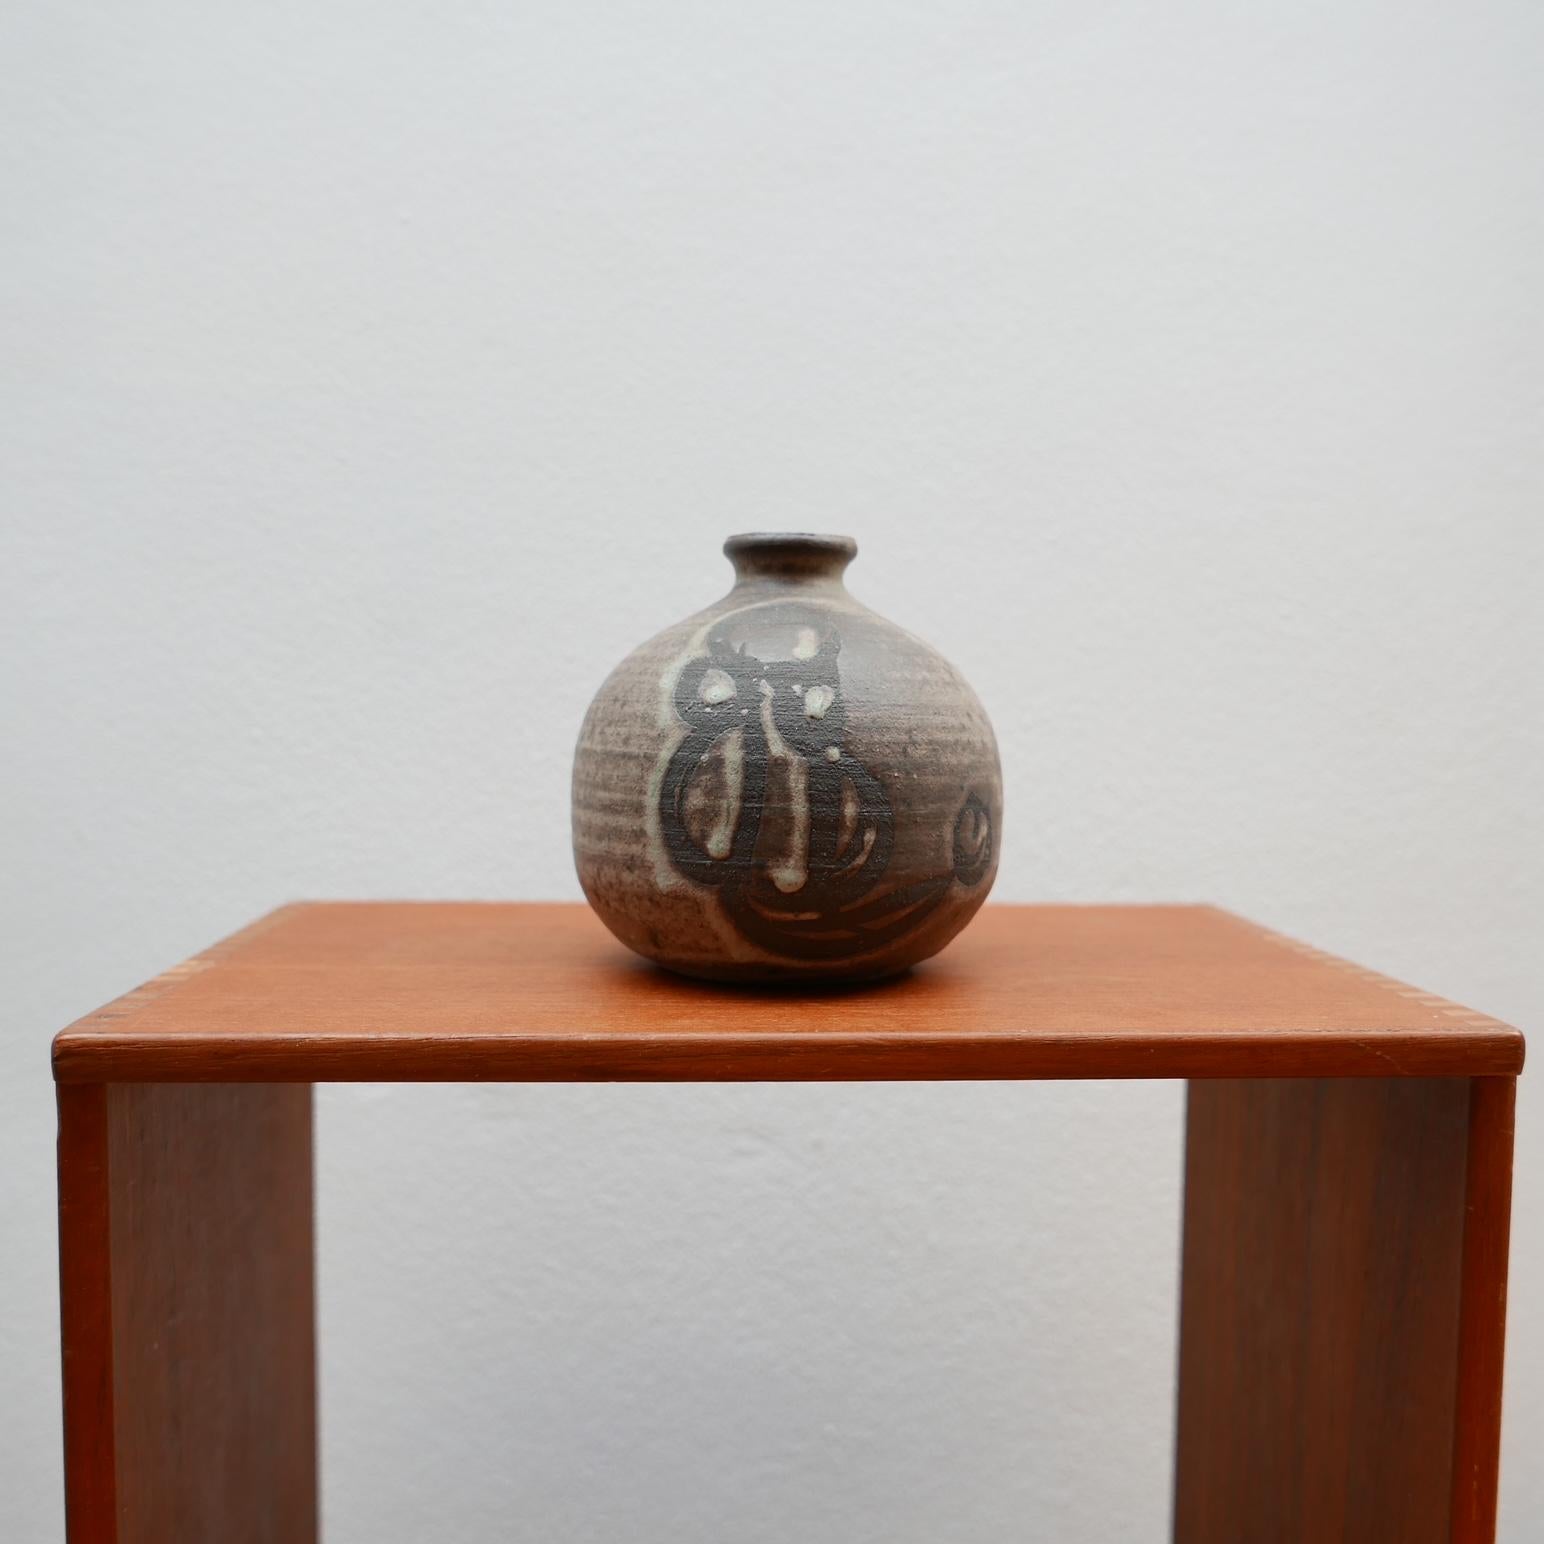 A small artist made ceramic vase or object.

Belgium, c1960s. 

Unusual desk top or shelf curio. 

Good condition. 

Location: London Gallery. 

Dimensions: 10 diameter x 10 height in cm. 

Delivery: POA.

 